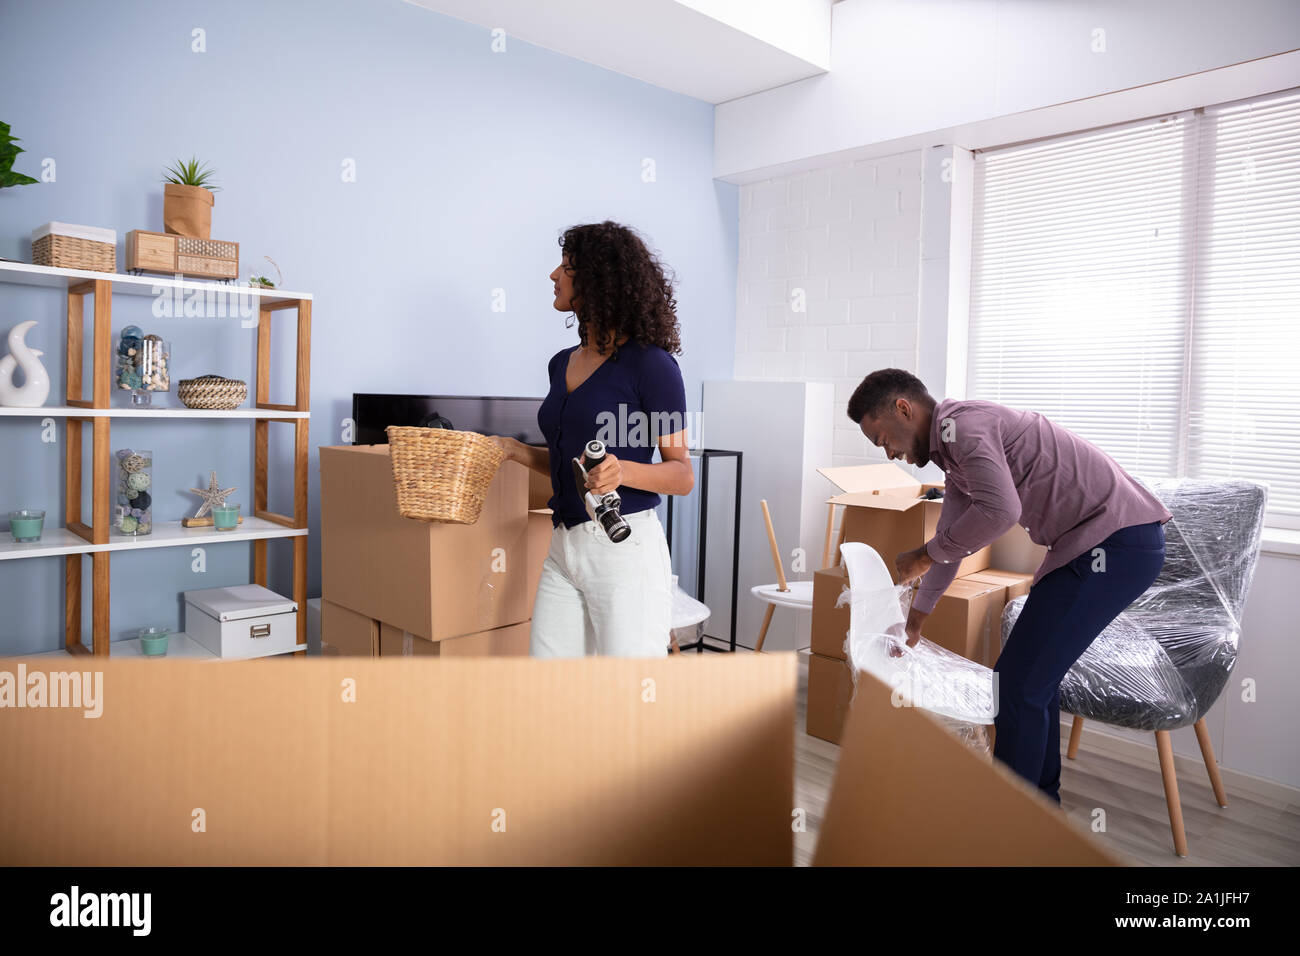 Couple Unpacking Boxes In Living Room In Their New Home Stock Photo